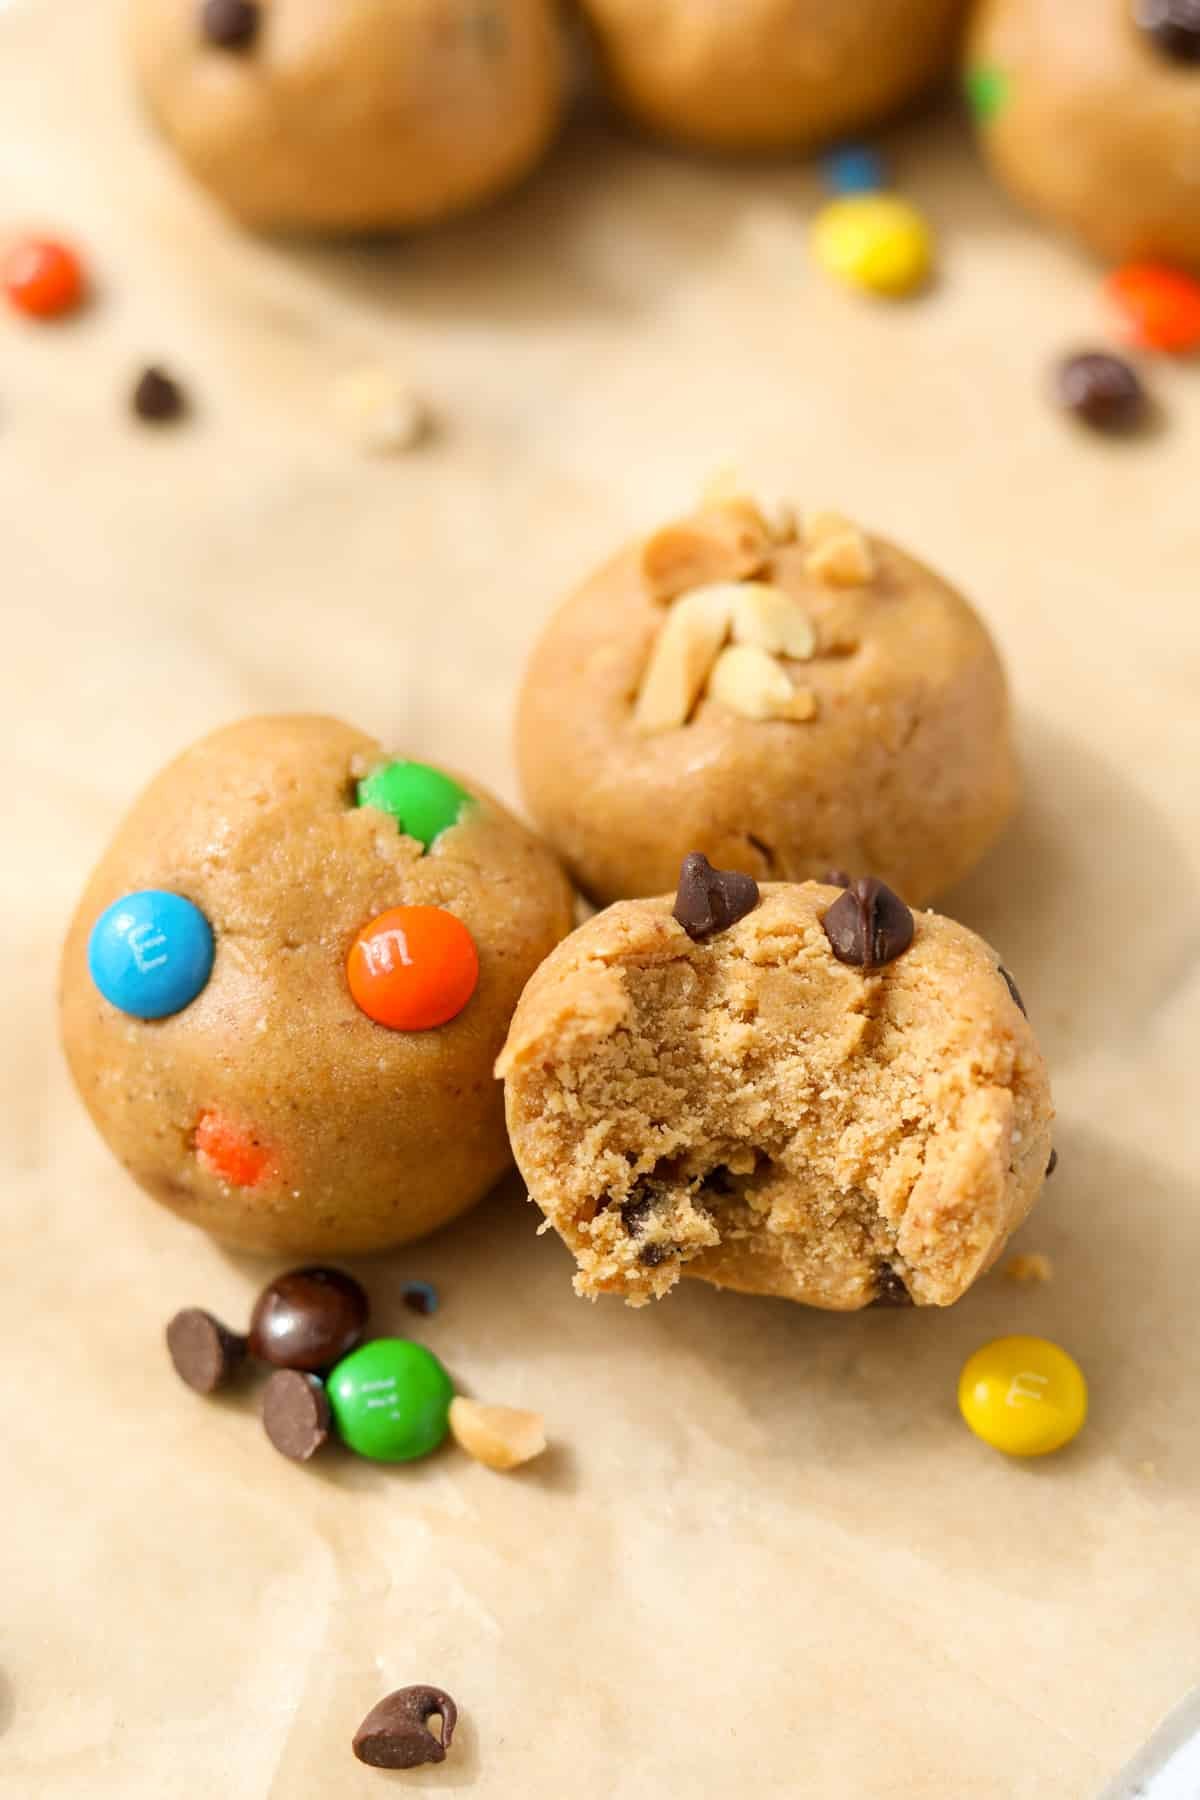 Three cookie dough balls featuring m&m's, chocolate chips, and chopped peanuts.